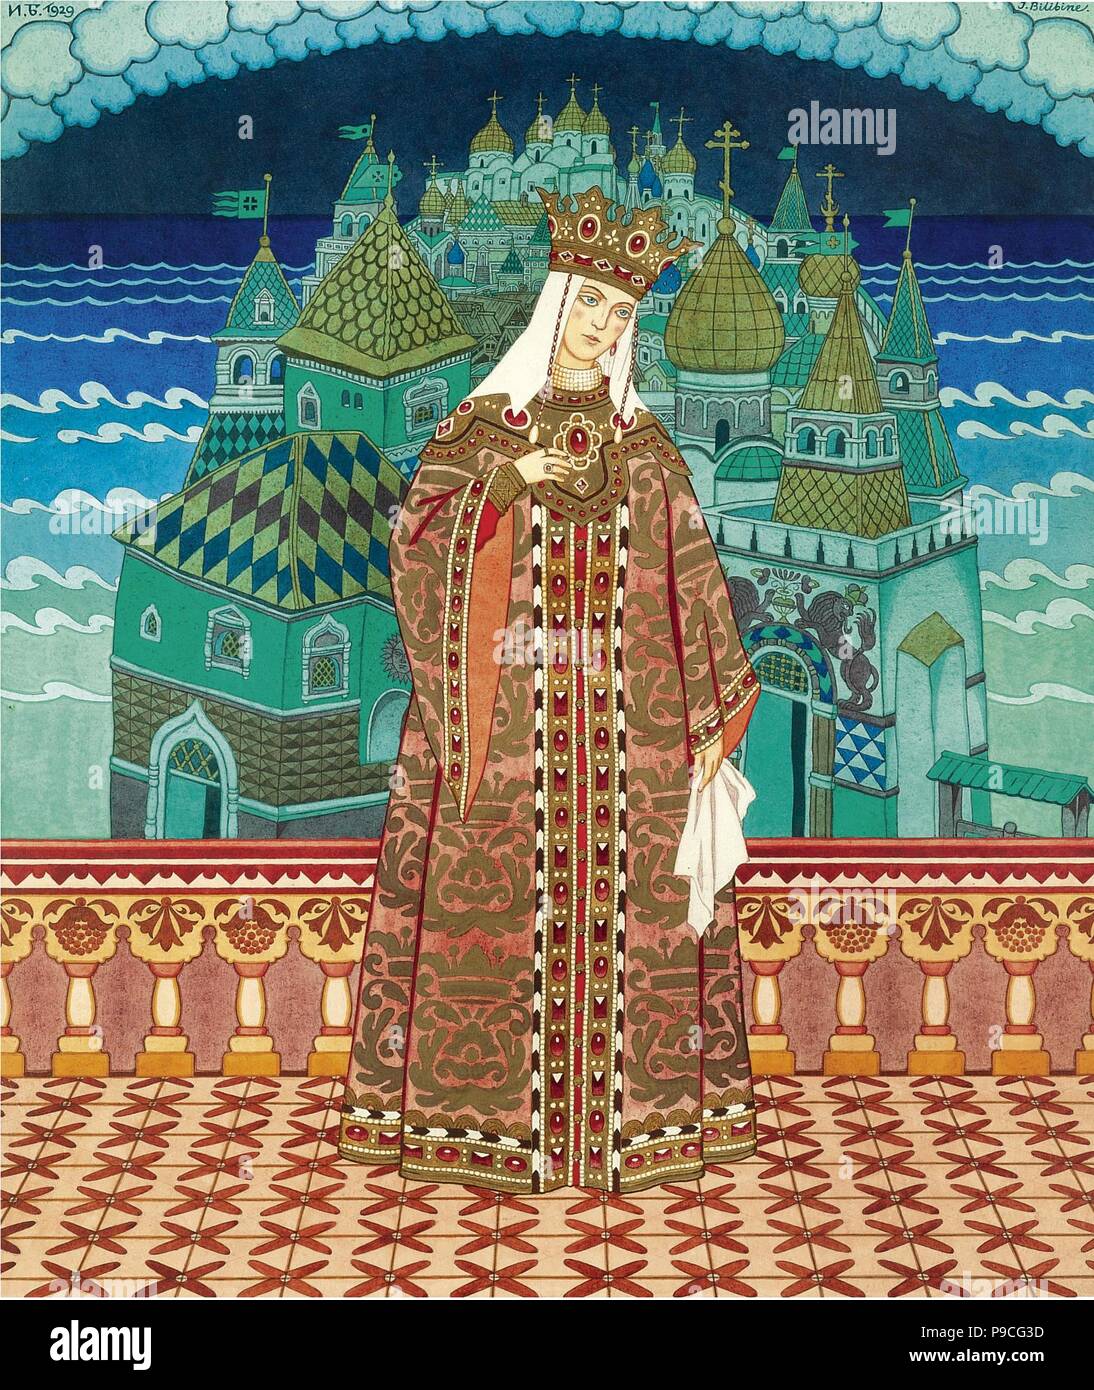 Militrissa. Costume design for the opera The Tale of Tsar Saltan by N. Rimsky-Korsakov. Museum: PRIVATE COLLECTION. Stock Photo